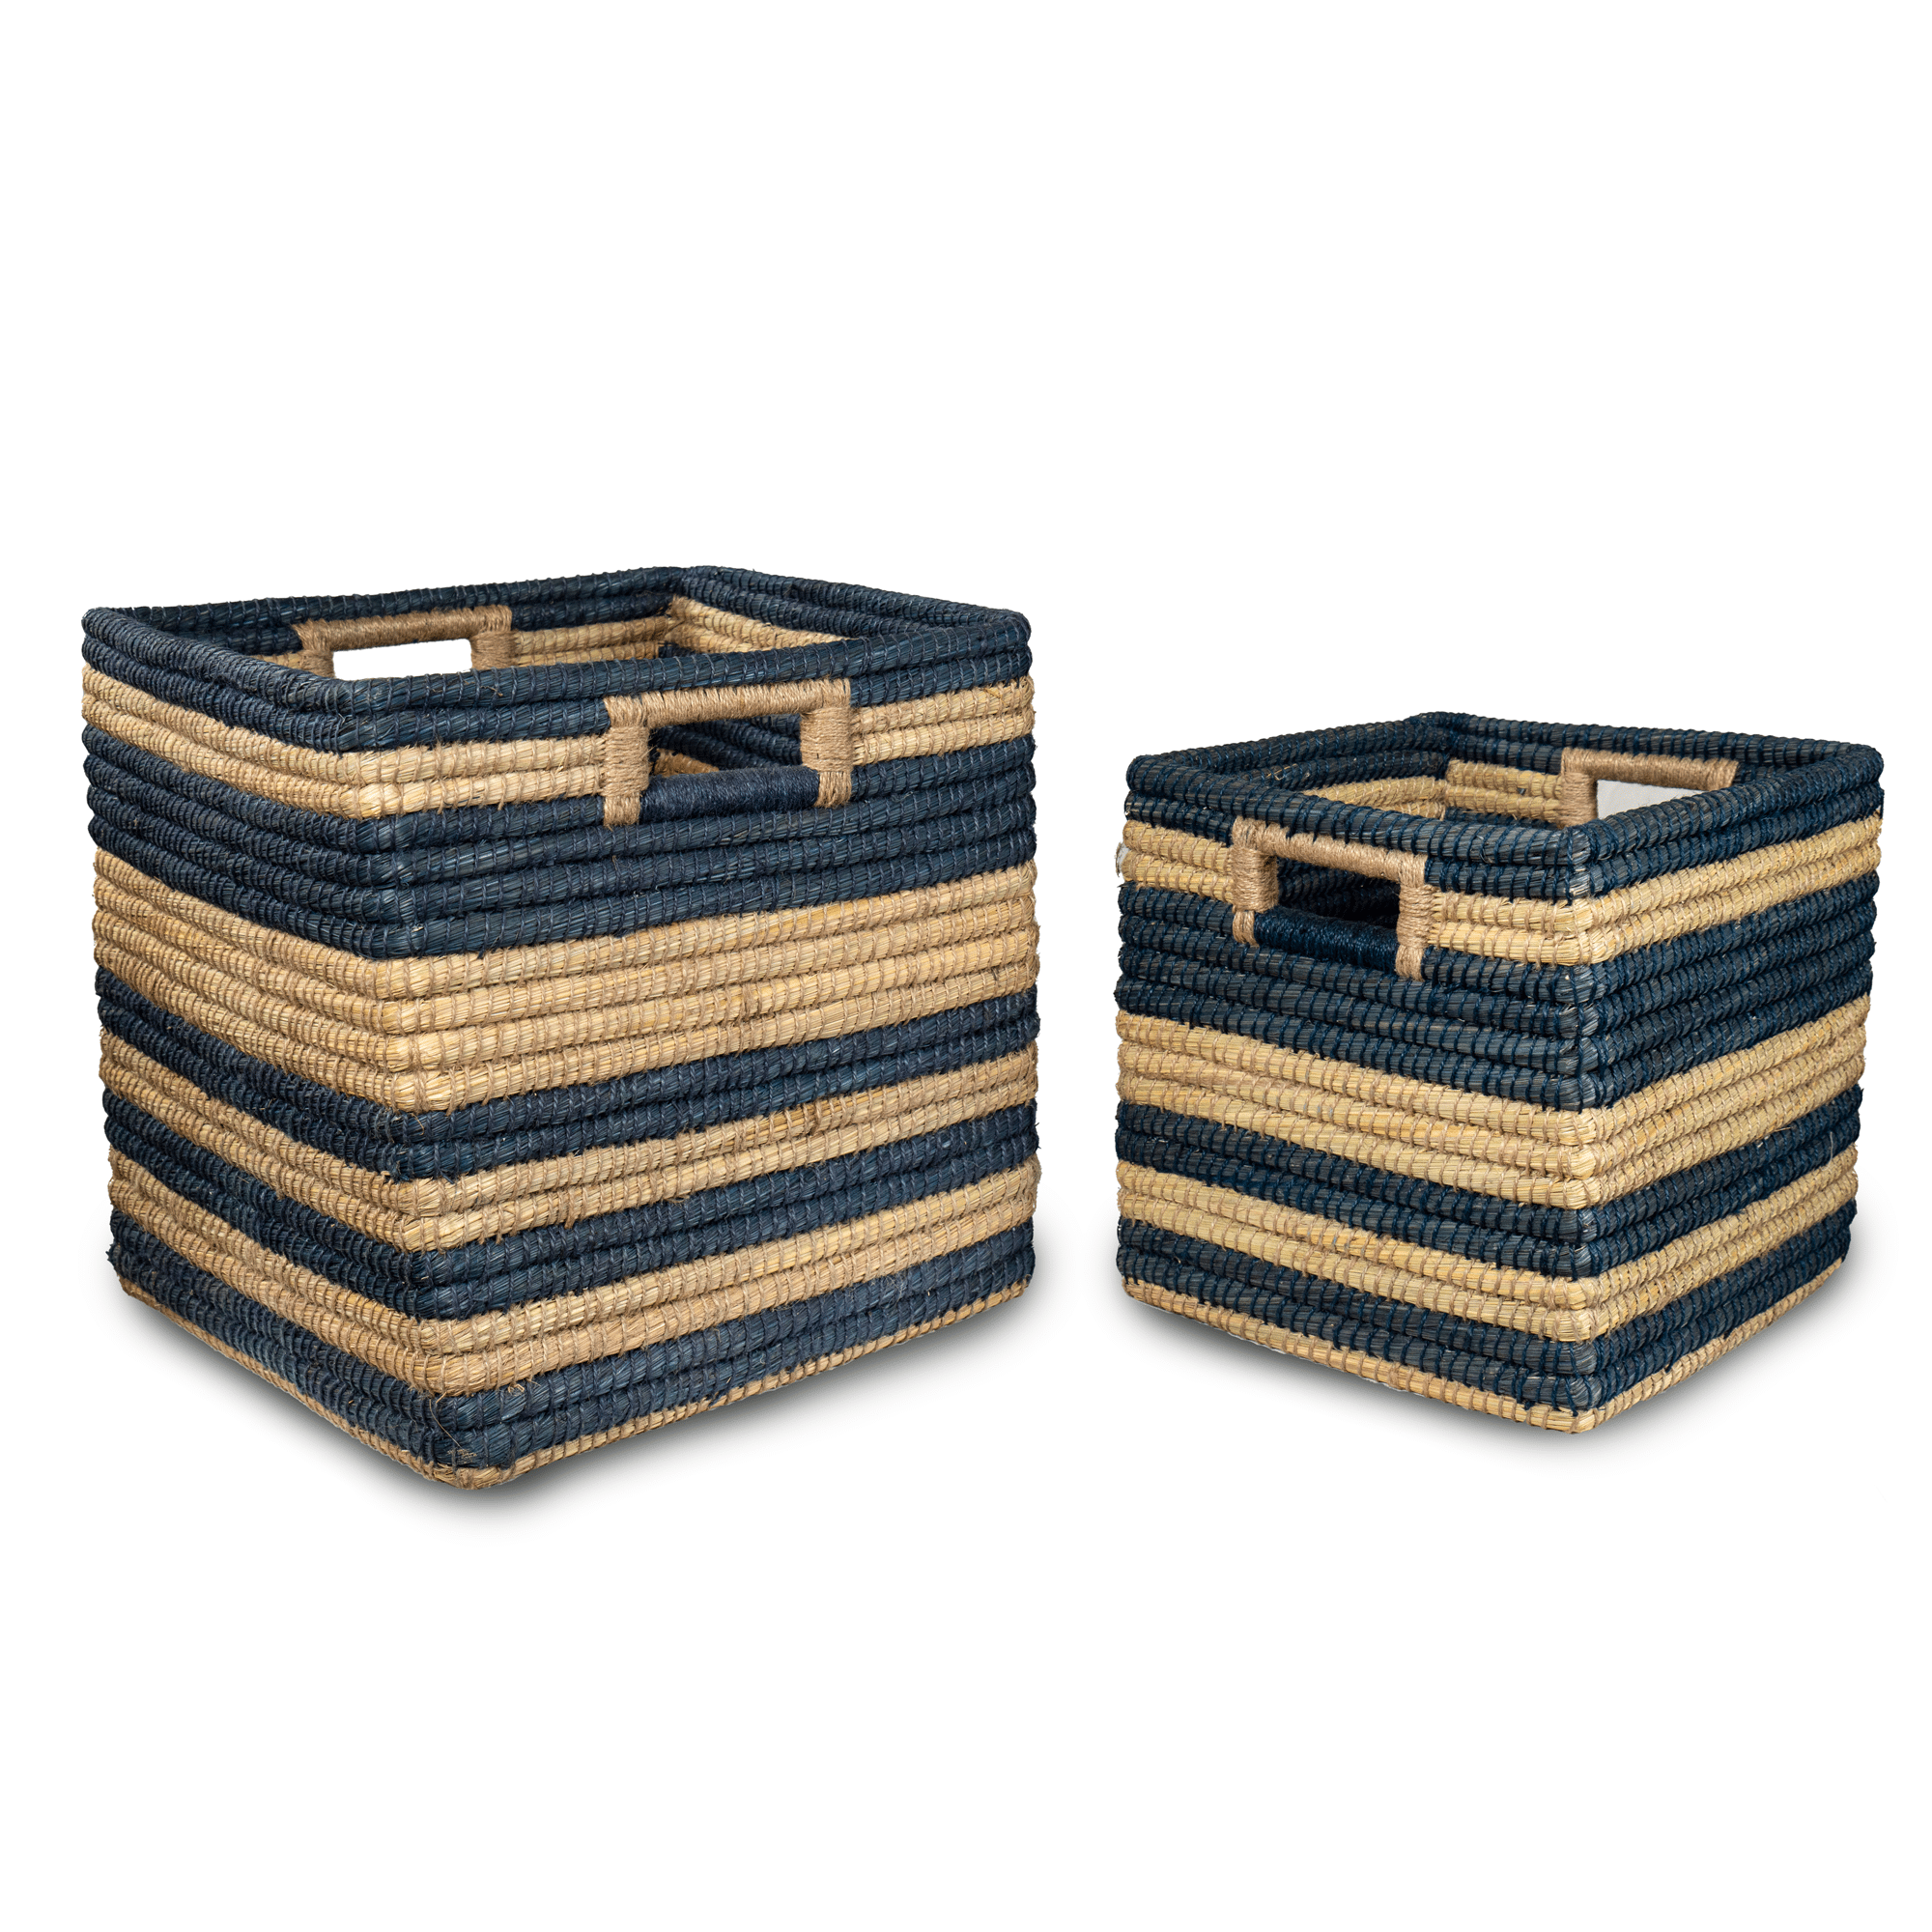 Rectangular Hand-Woven Kans Grass Storage Tray with Built-in Handles - ICKGHB15 (5)